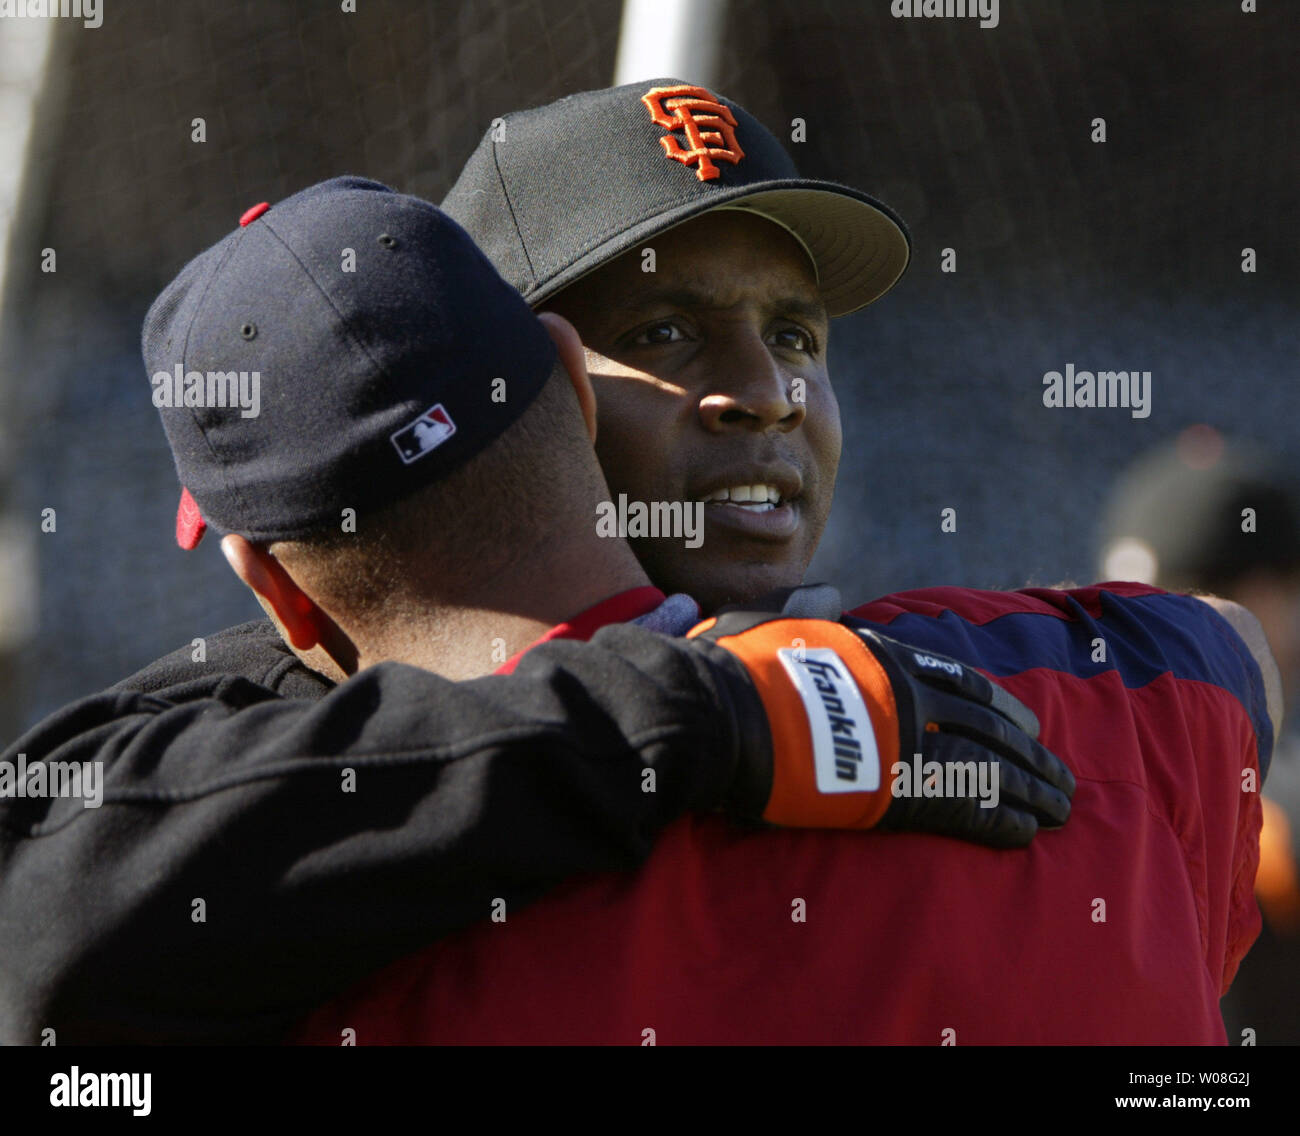 San Francisco Giants Barry Bonds hugs St. Louis Cardinals Albert Pujols at batting practice before their game at AT&T Park in San Francisco on May 23, 2006.  (UPI Photo/Bruce Gordon) Stock Photo